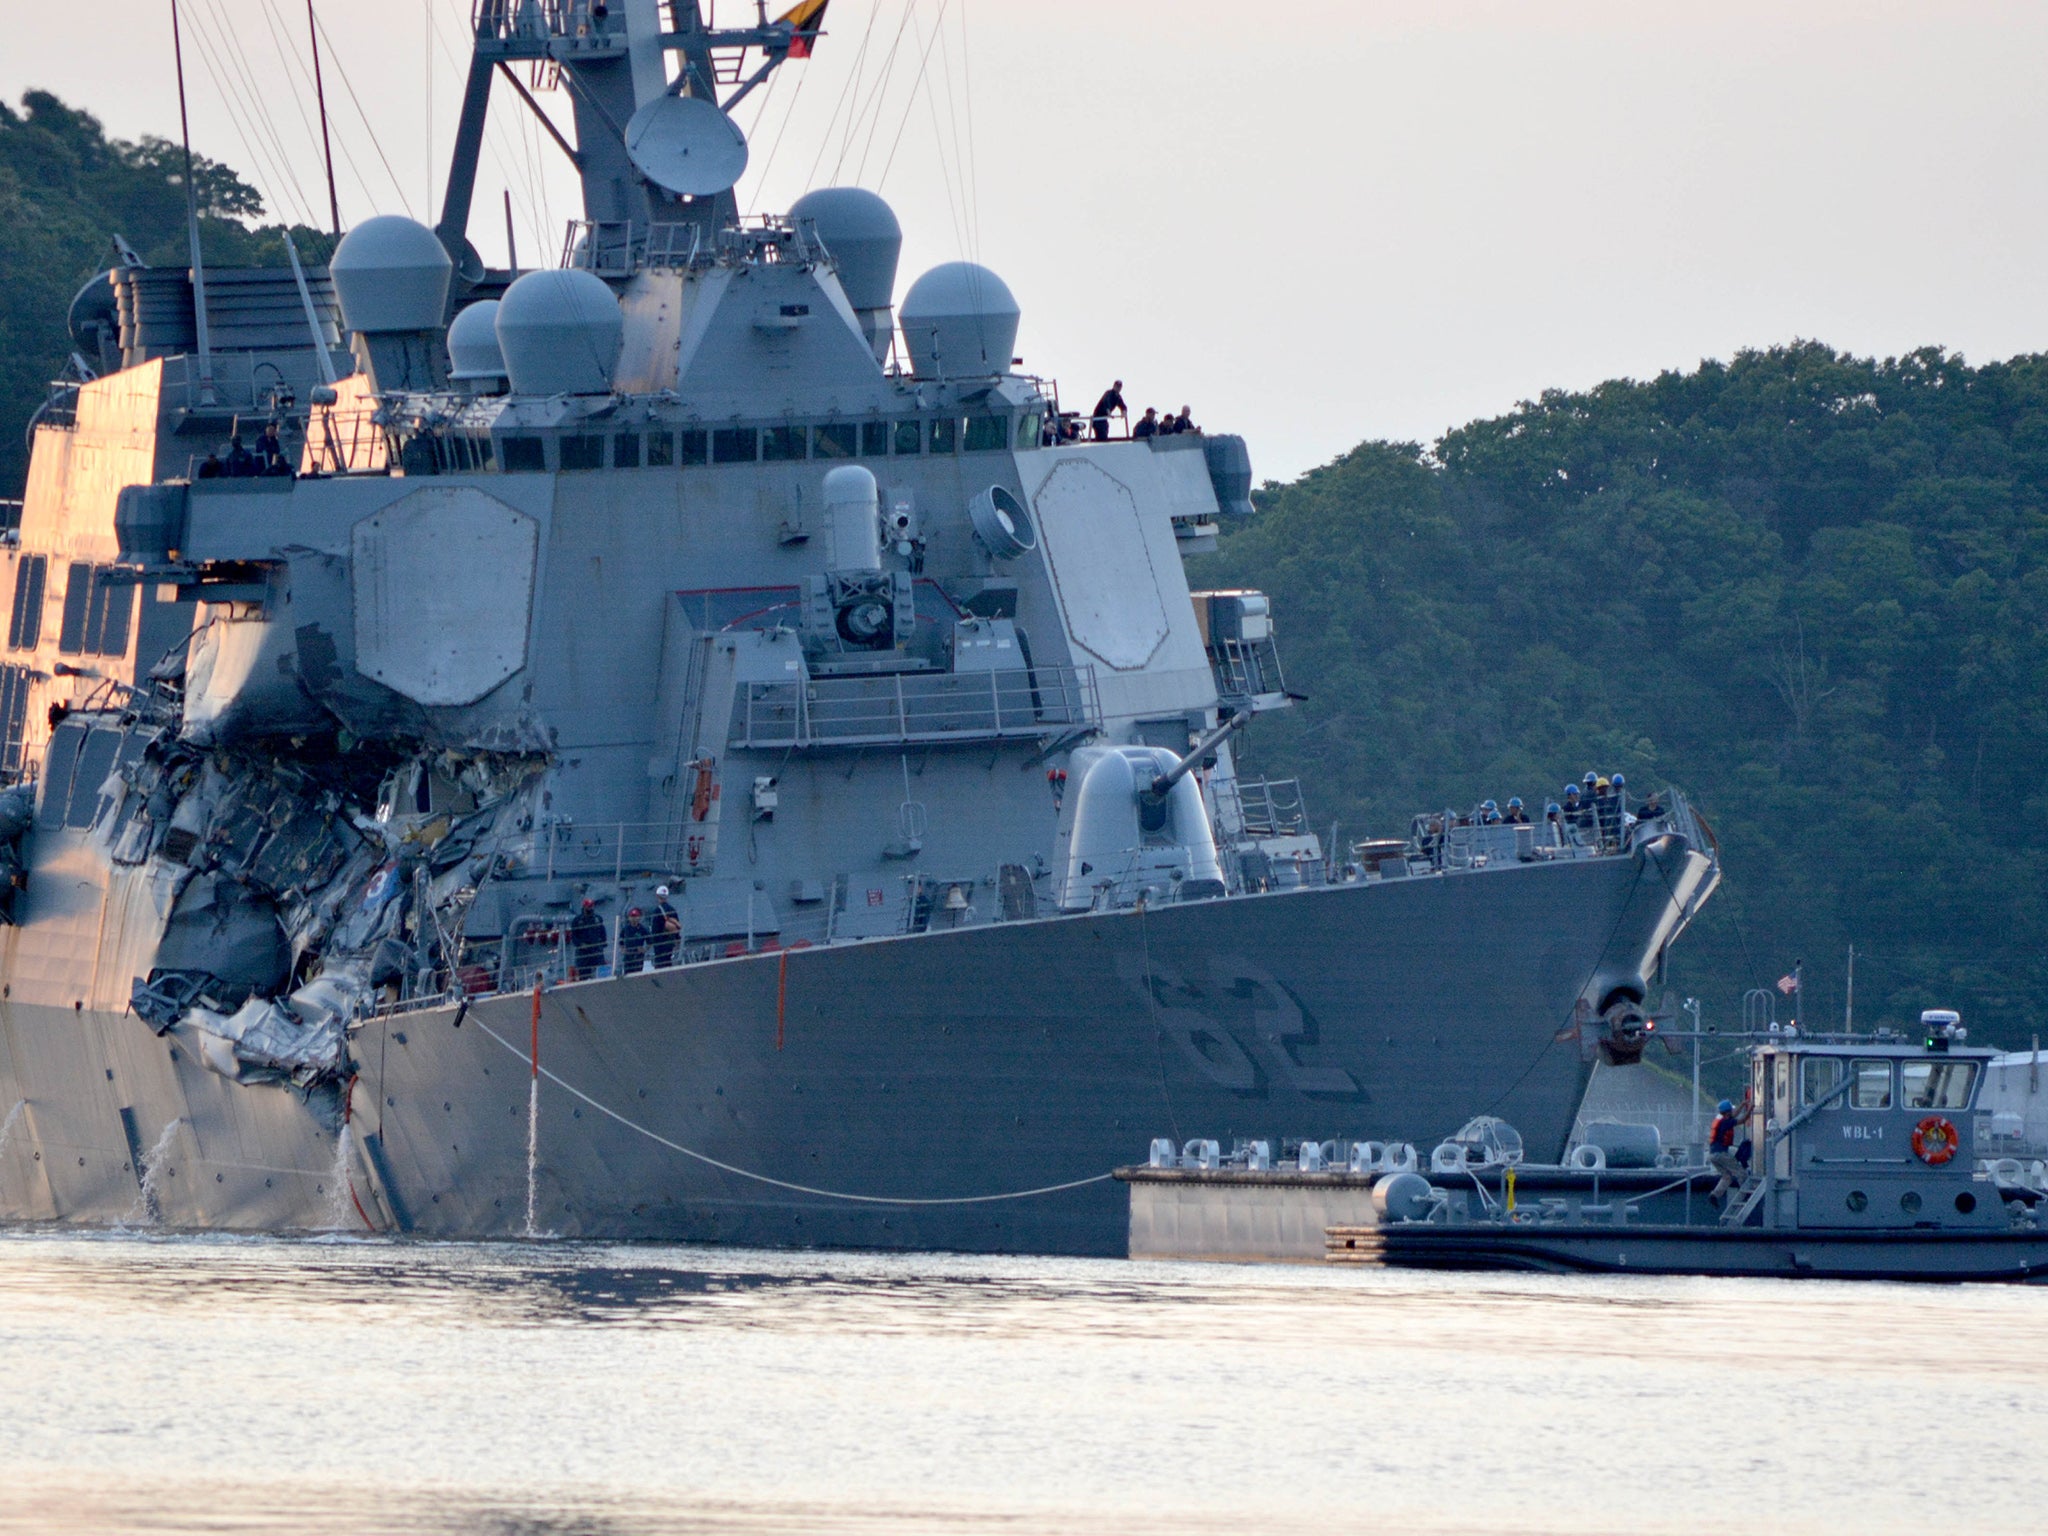 Crash comes weeks after USS Fitzgerald in deadly collision